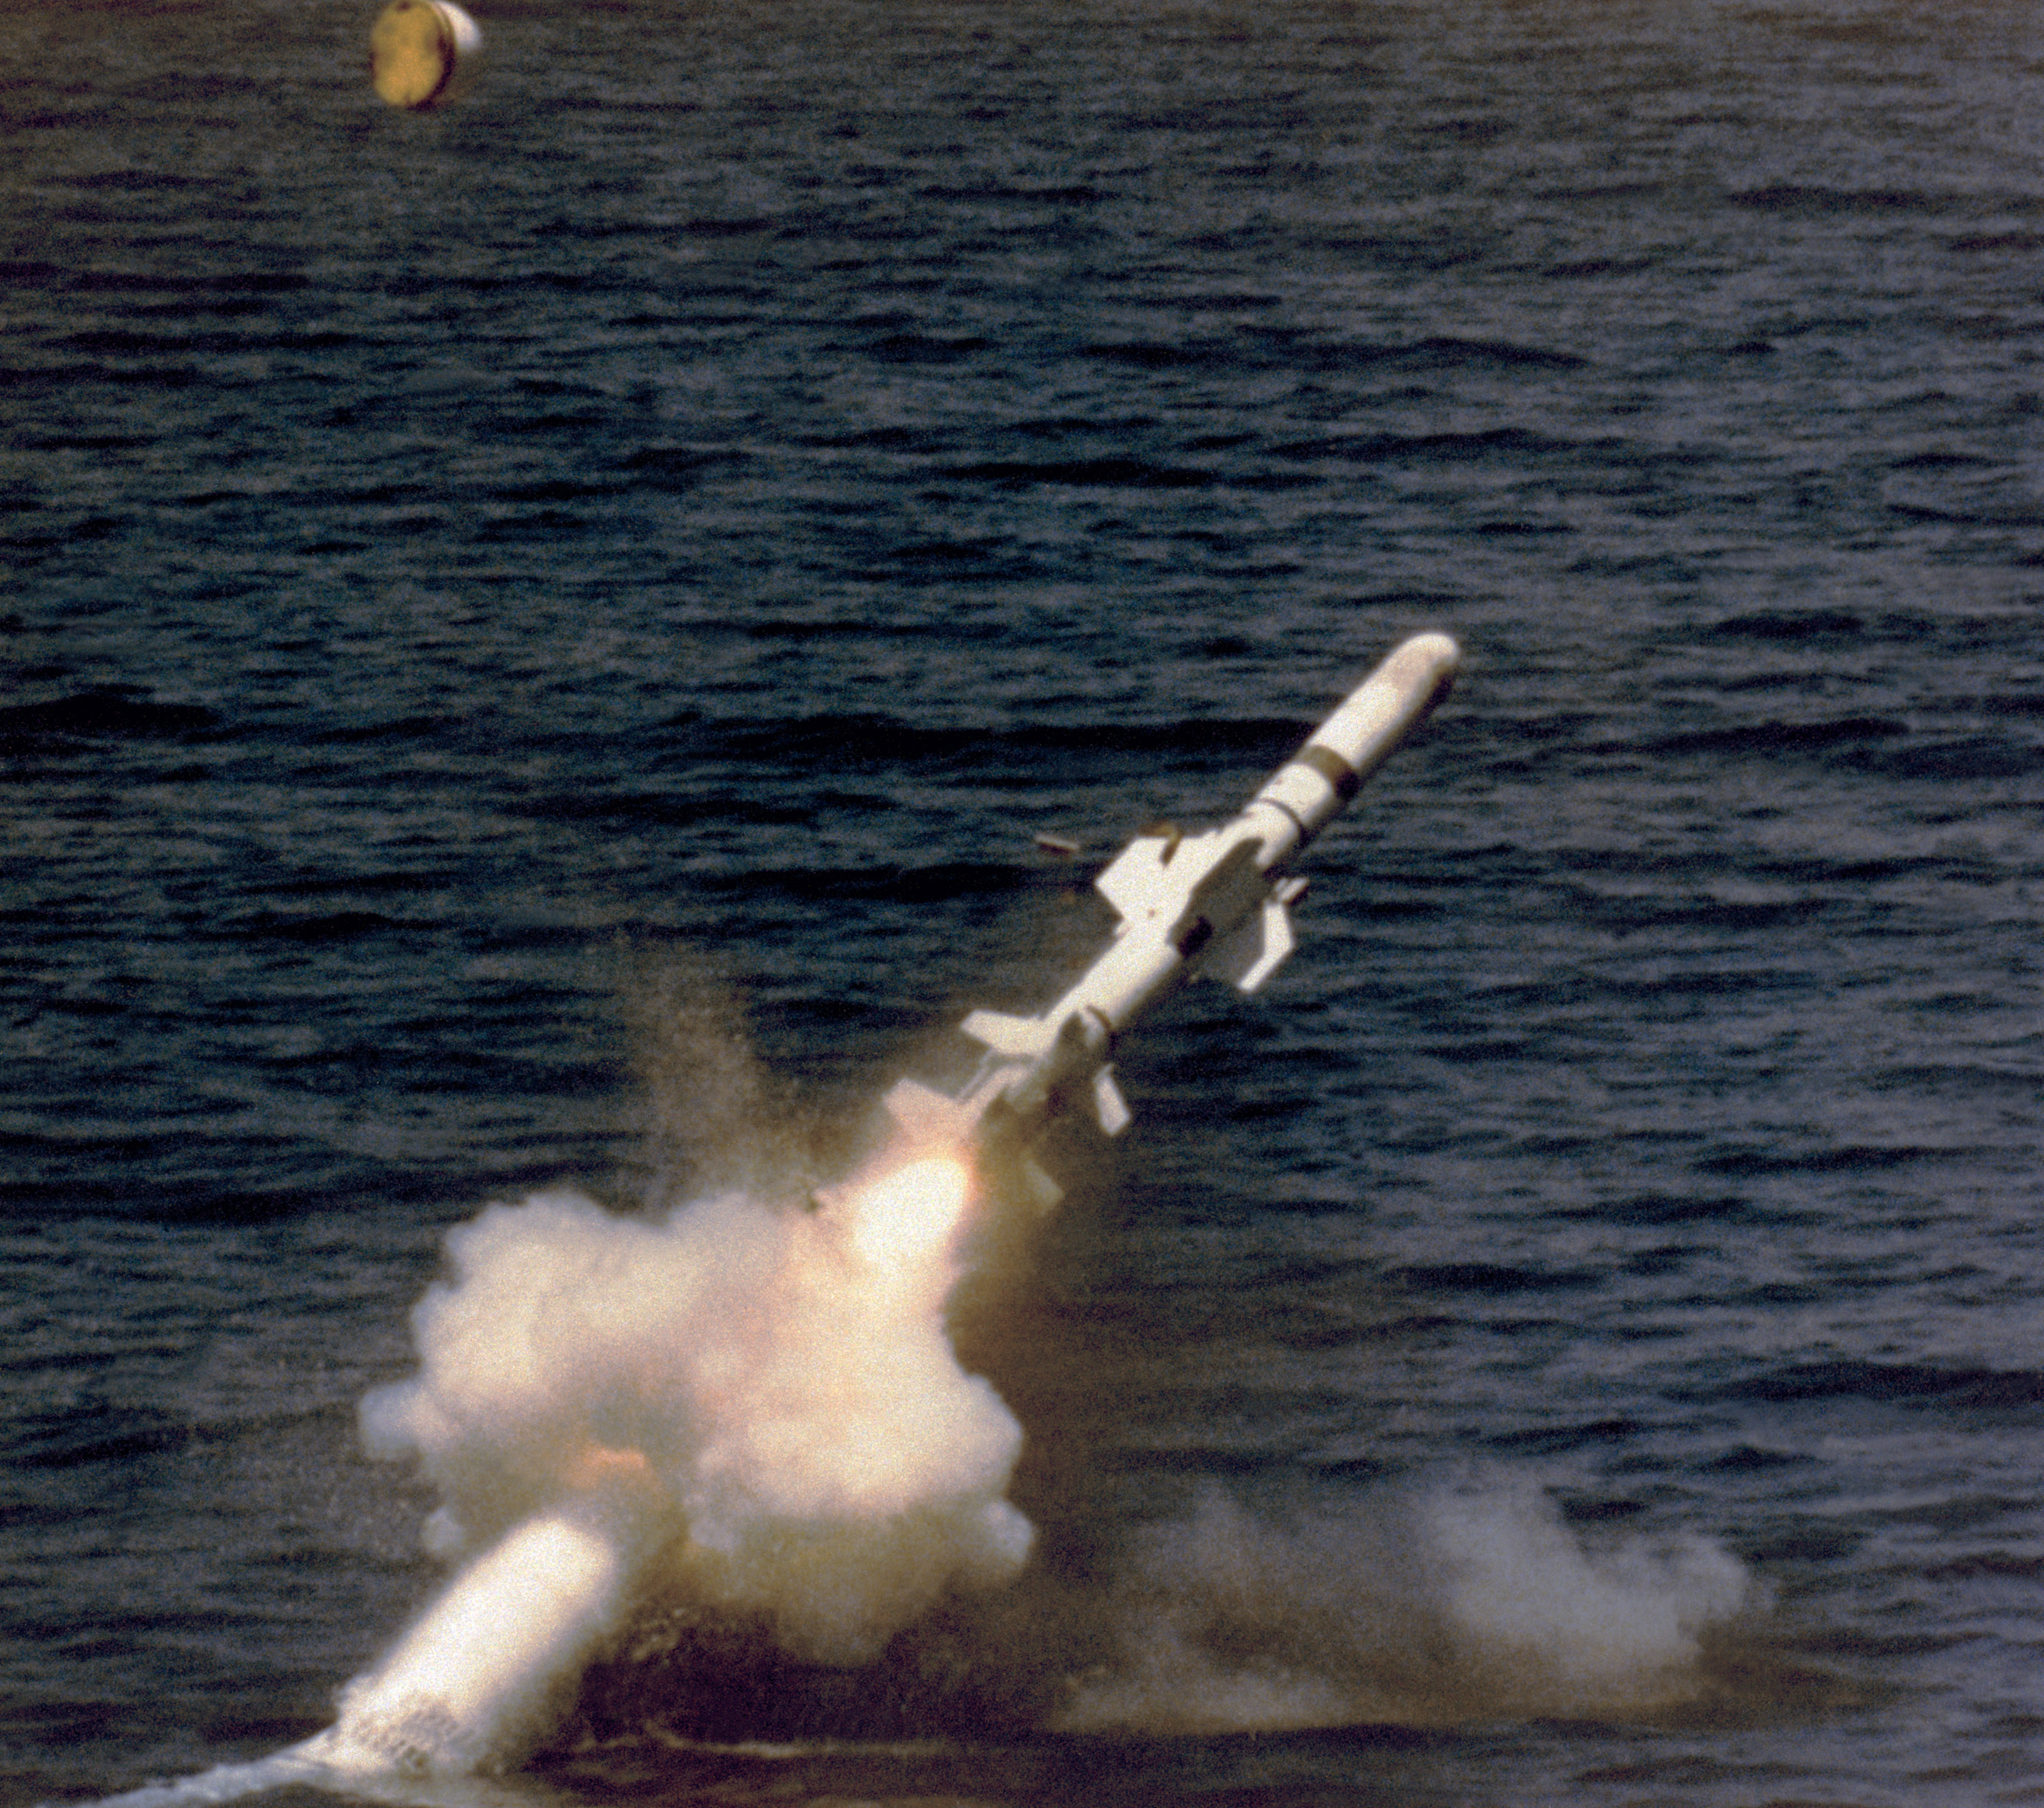 Harpoon_launched_by_submarine.jpg